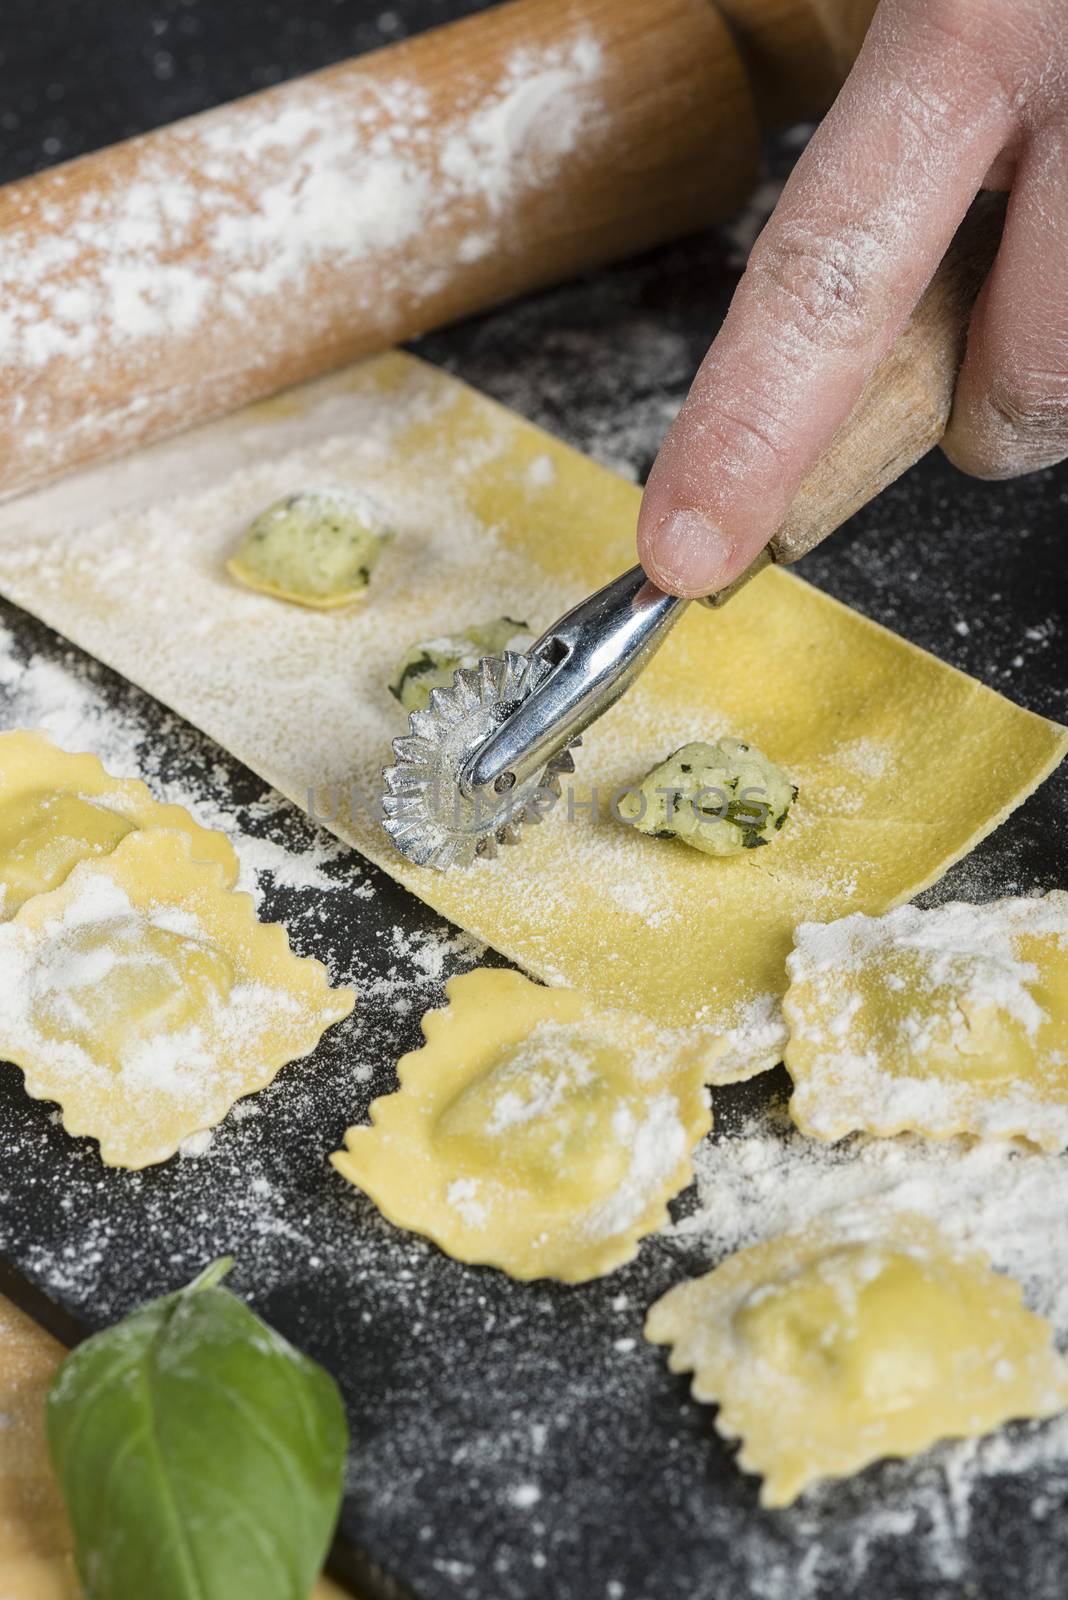 Preparing ravioli in the kitchen with tools and ingredients. by verbano